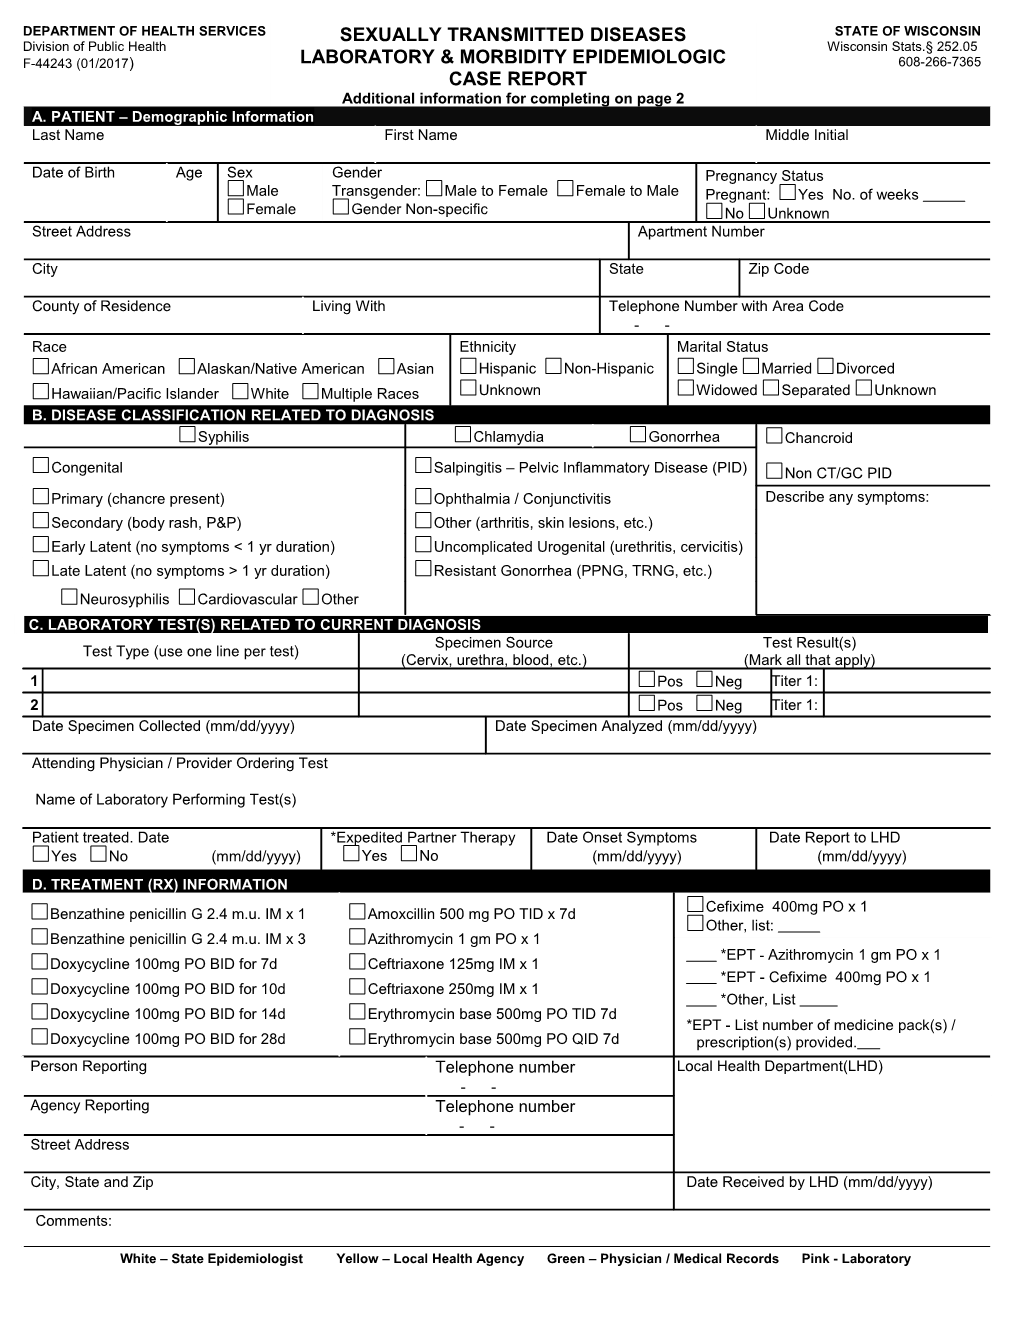 Sexually Transmitted Diseases Laboratory & Morbidity Epidemiologic Case Report, F-44243